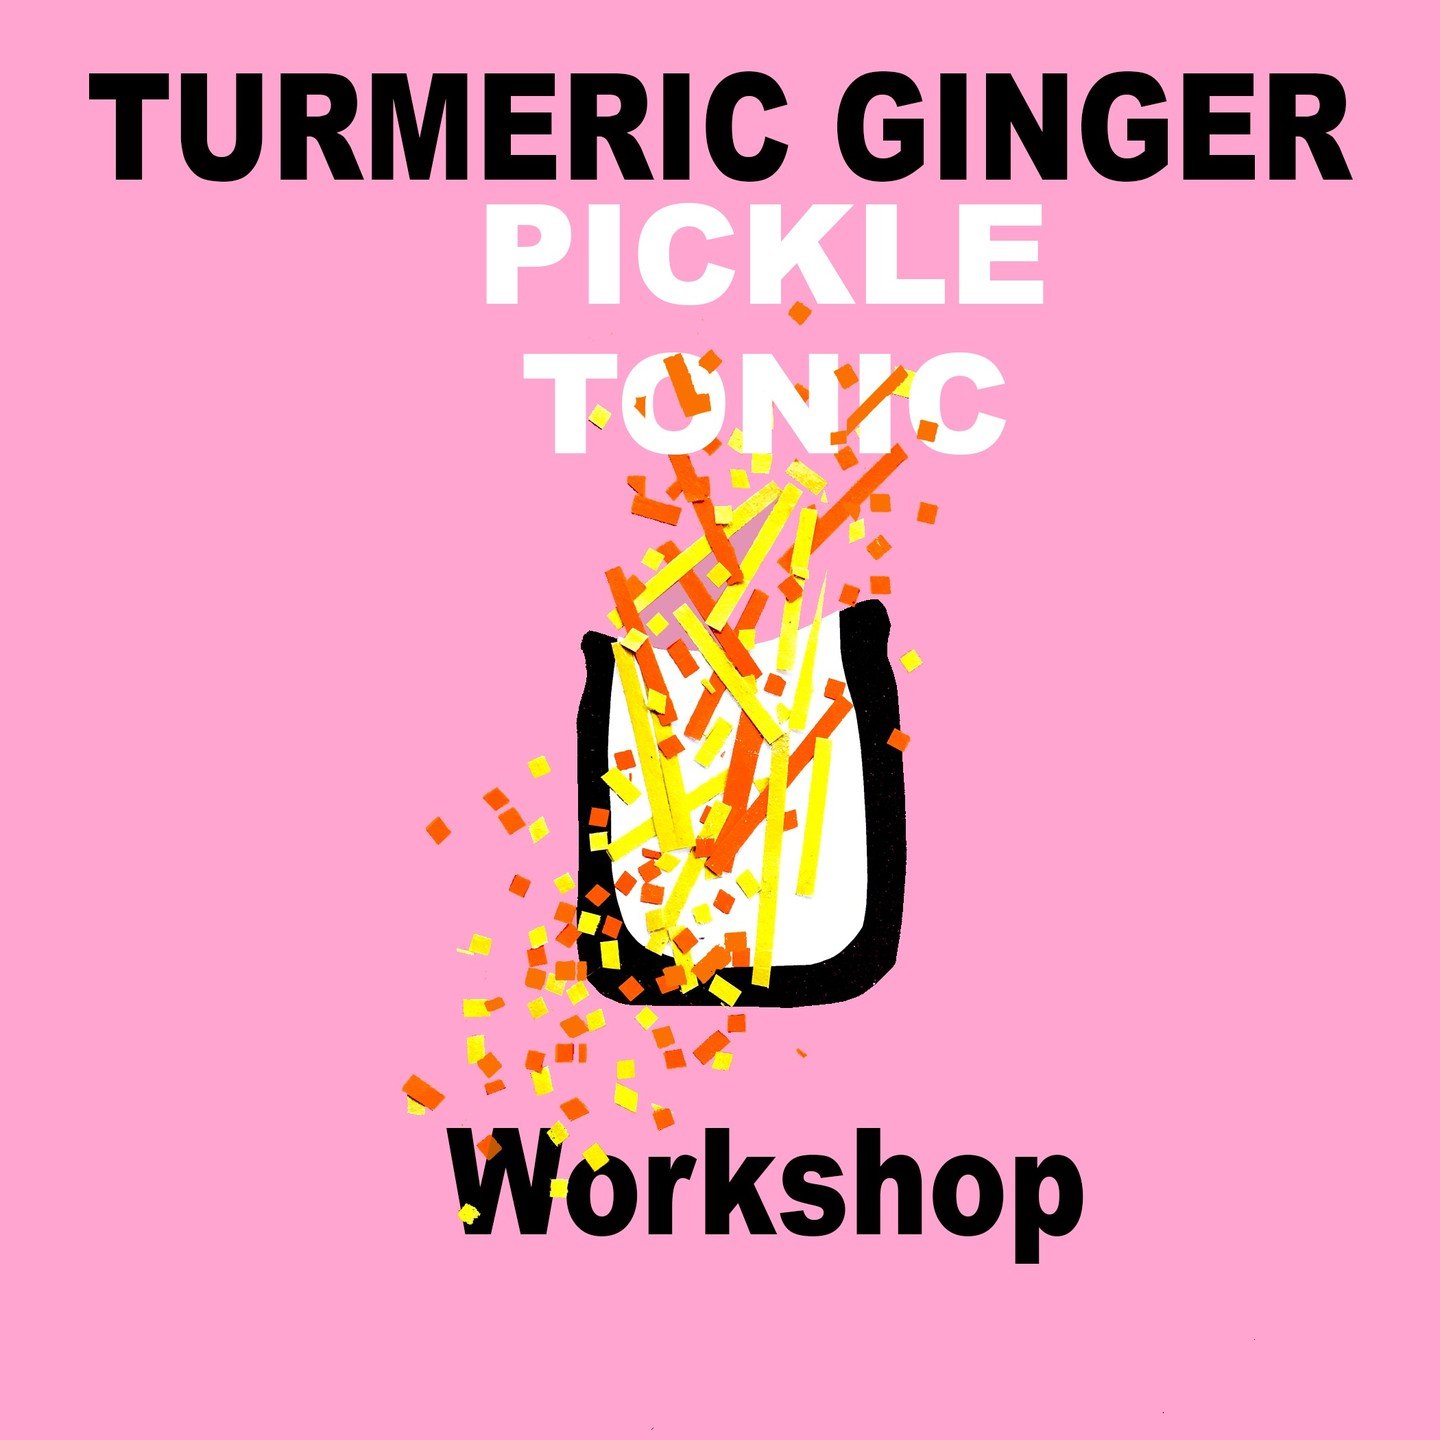 May 4th, join our Turmeric Ginger Pickle and Tonic workshop. Learn how to make this refreshing ayurvedic fermented pickle, craft a tonic with the leftovers and fight inflammation! Then, eat a nice little meal with us and take home your goodies! Learn